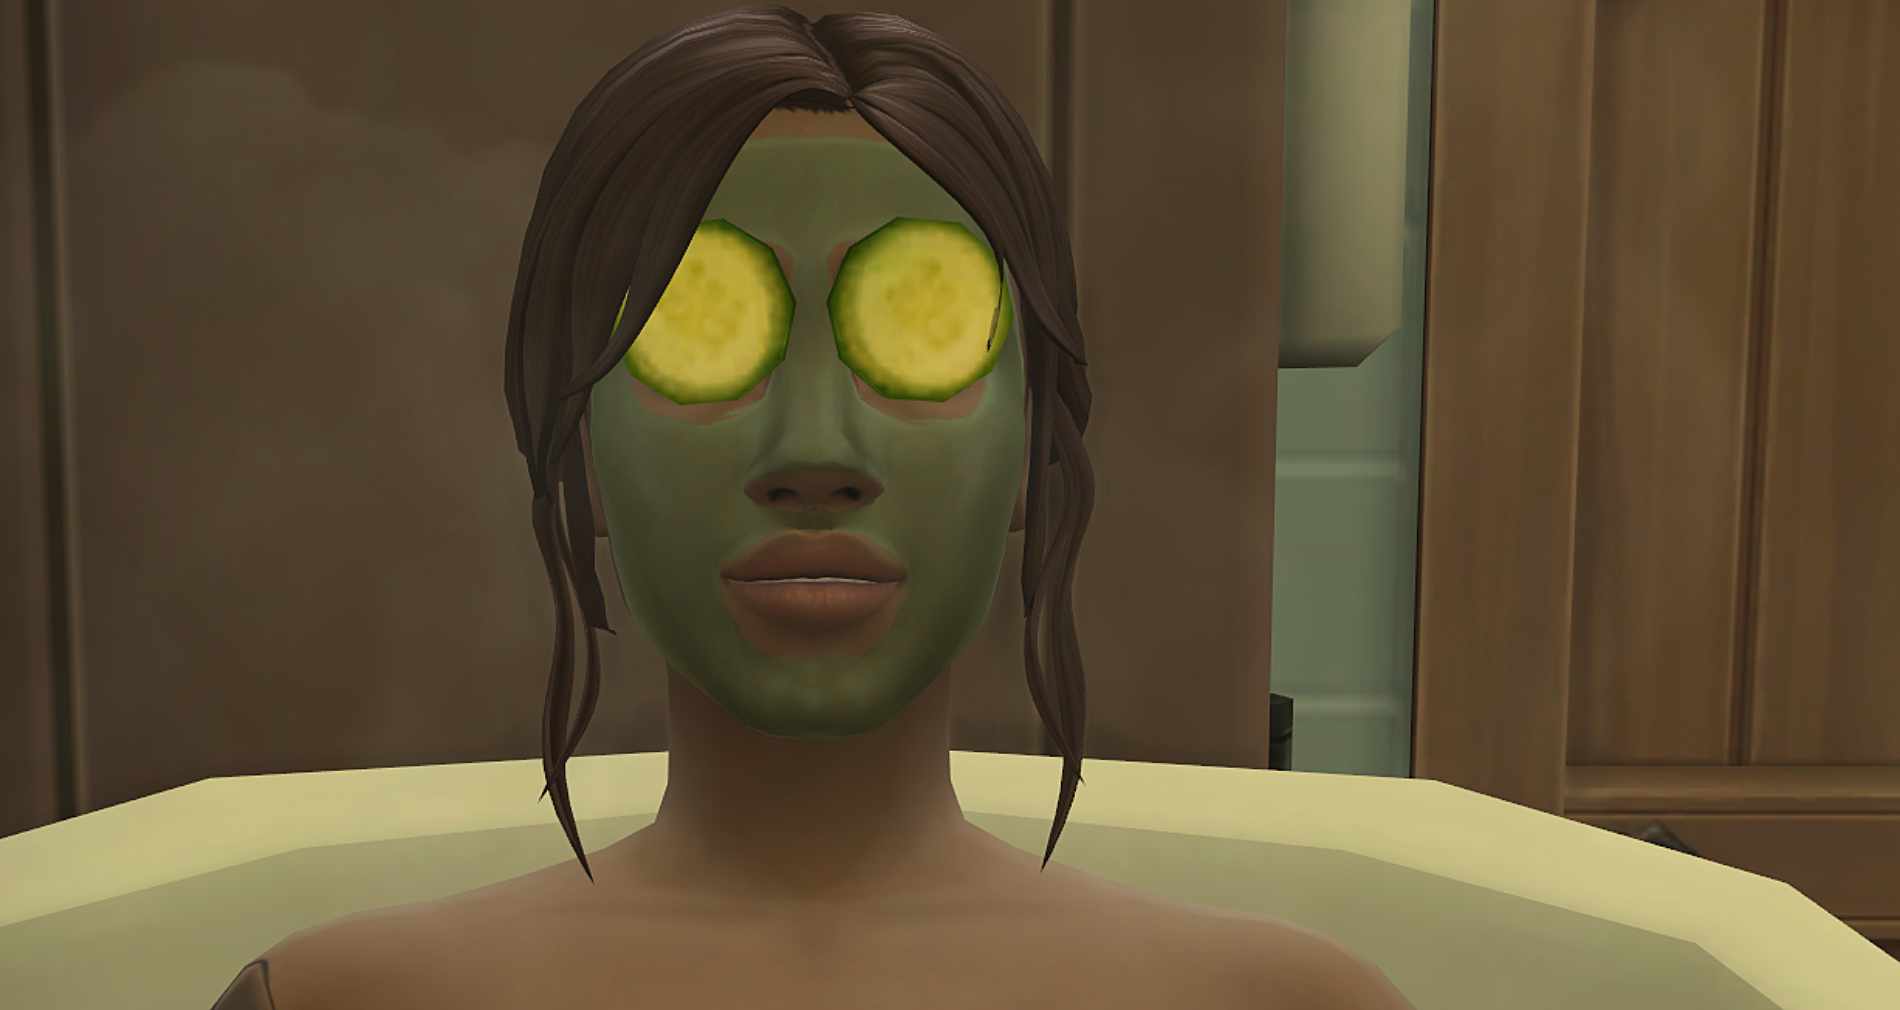 Sims 4 nails update: Preparing mods and CC for September 2021 changes